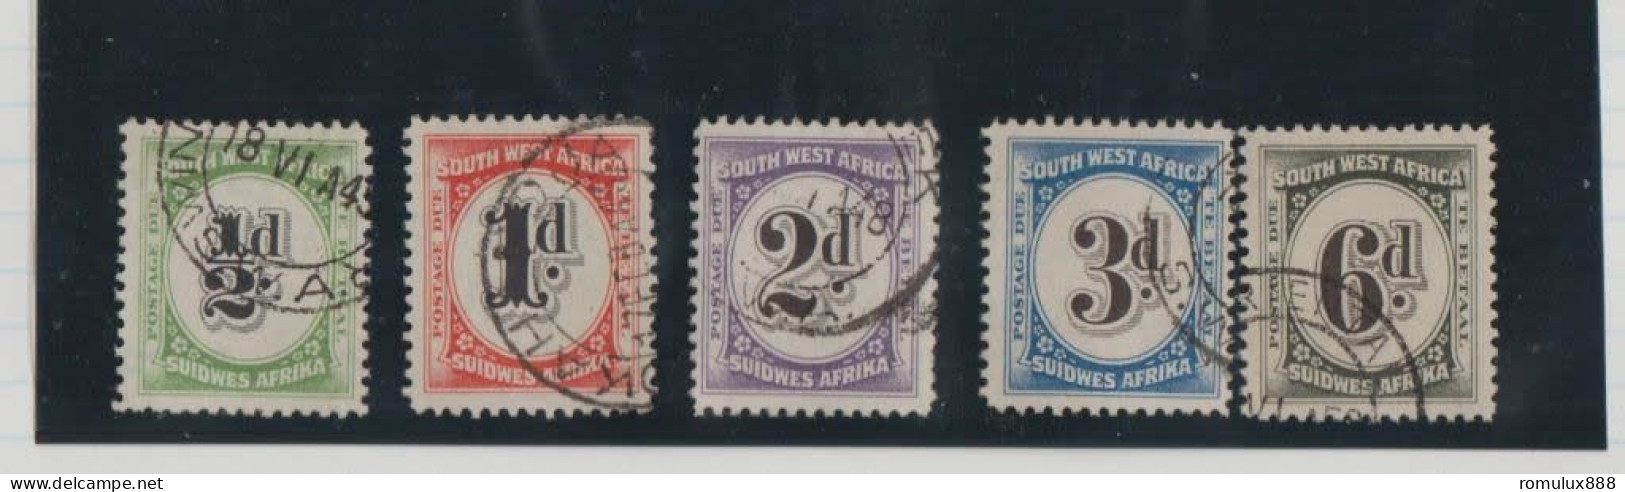 SWA 1931 POSTAGE DUES-GOOD USED SET OF 5 -SG D47-D51 - South West Africa (1923-1990)